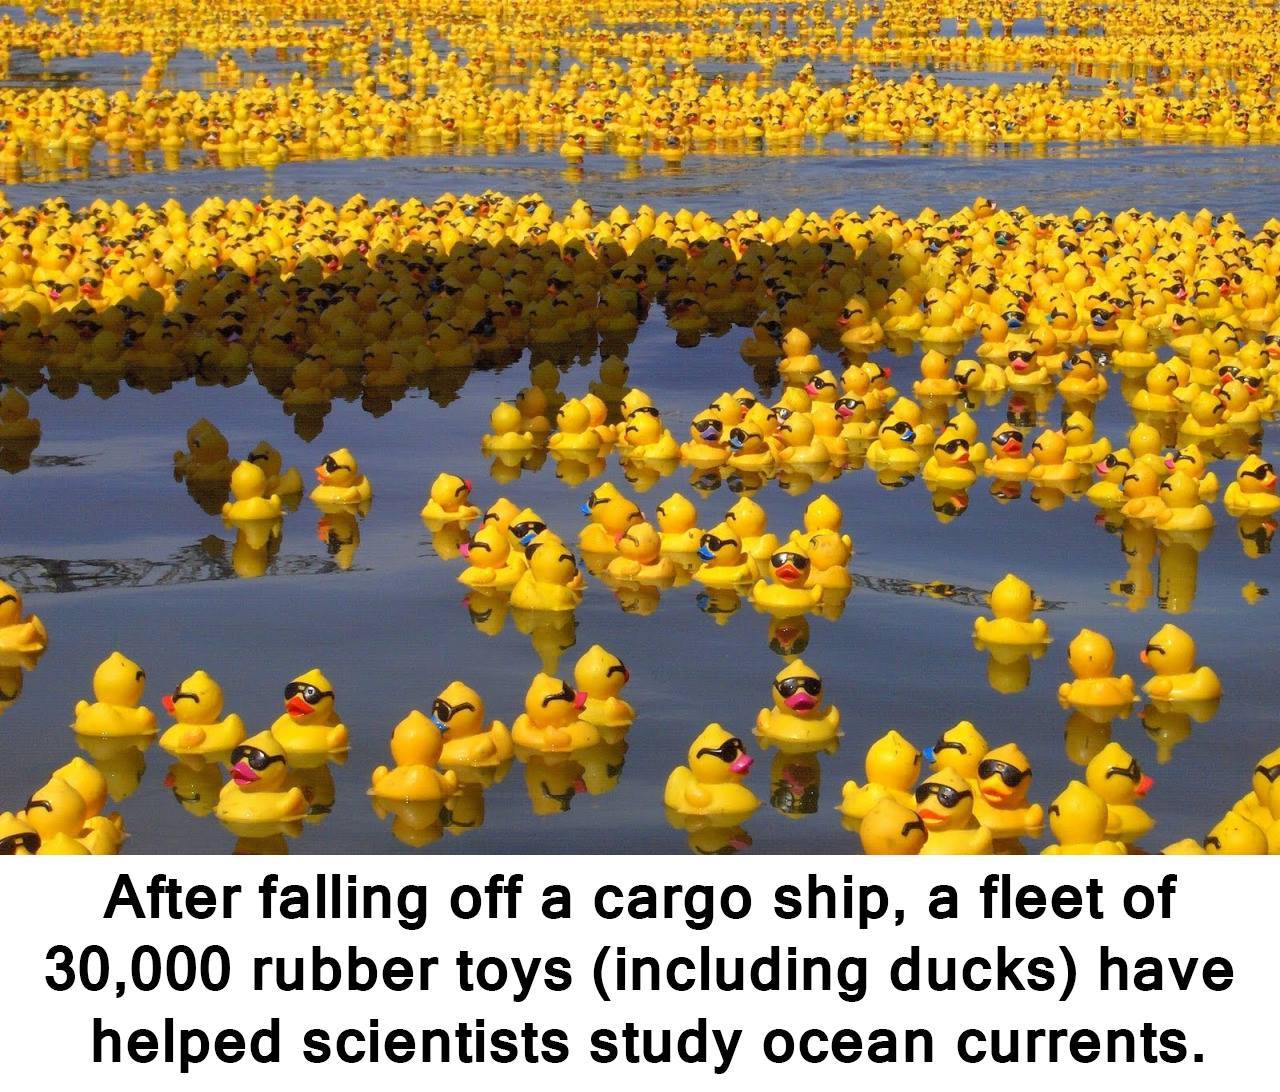 rubber ducks lost at sea - After falling off a cargo ship, a fleet of 30,000 rubber toys including ducks have helped scientists study ocean currents.